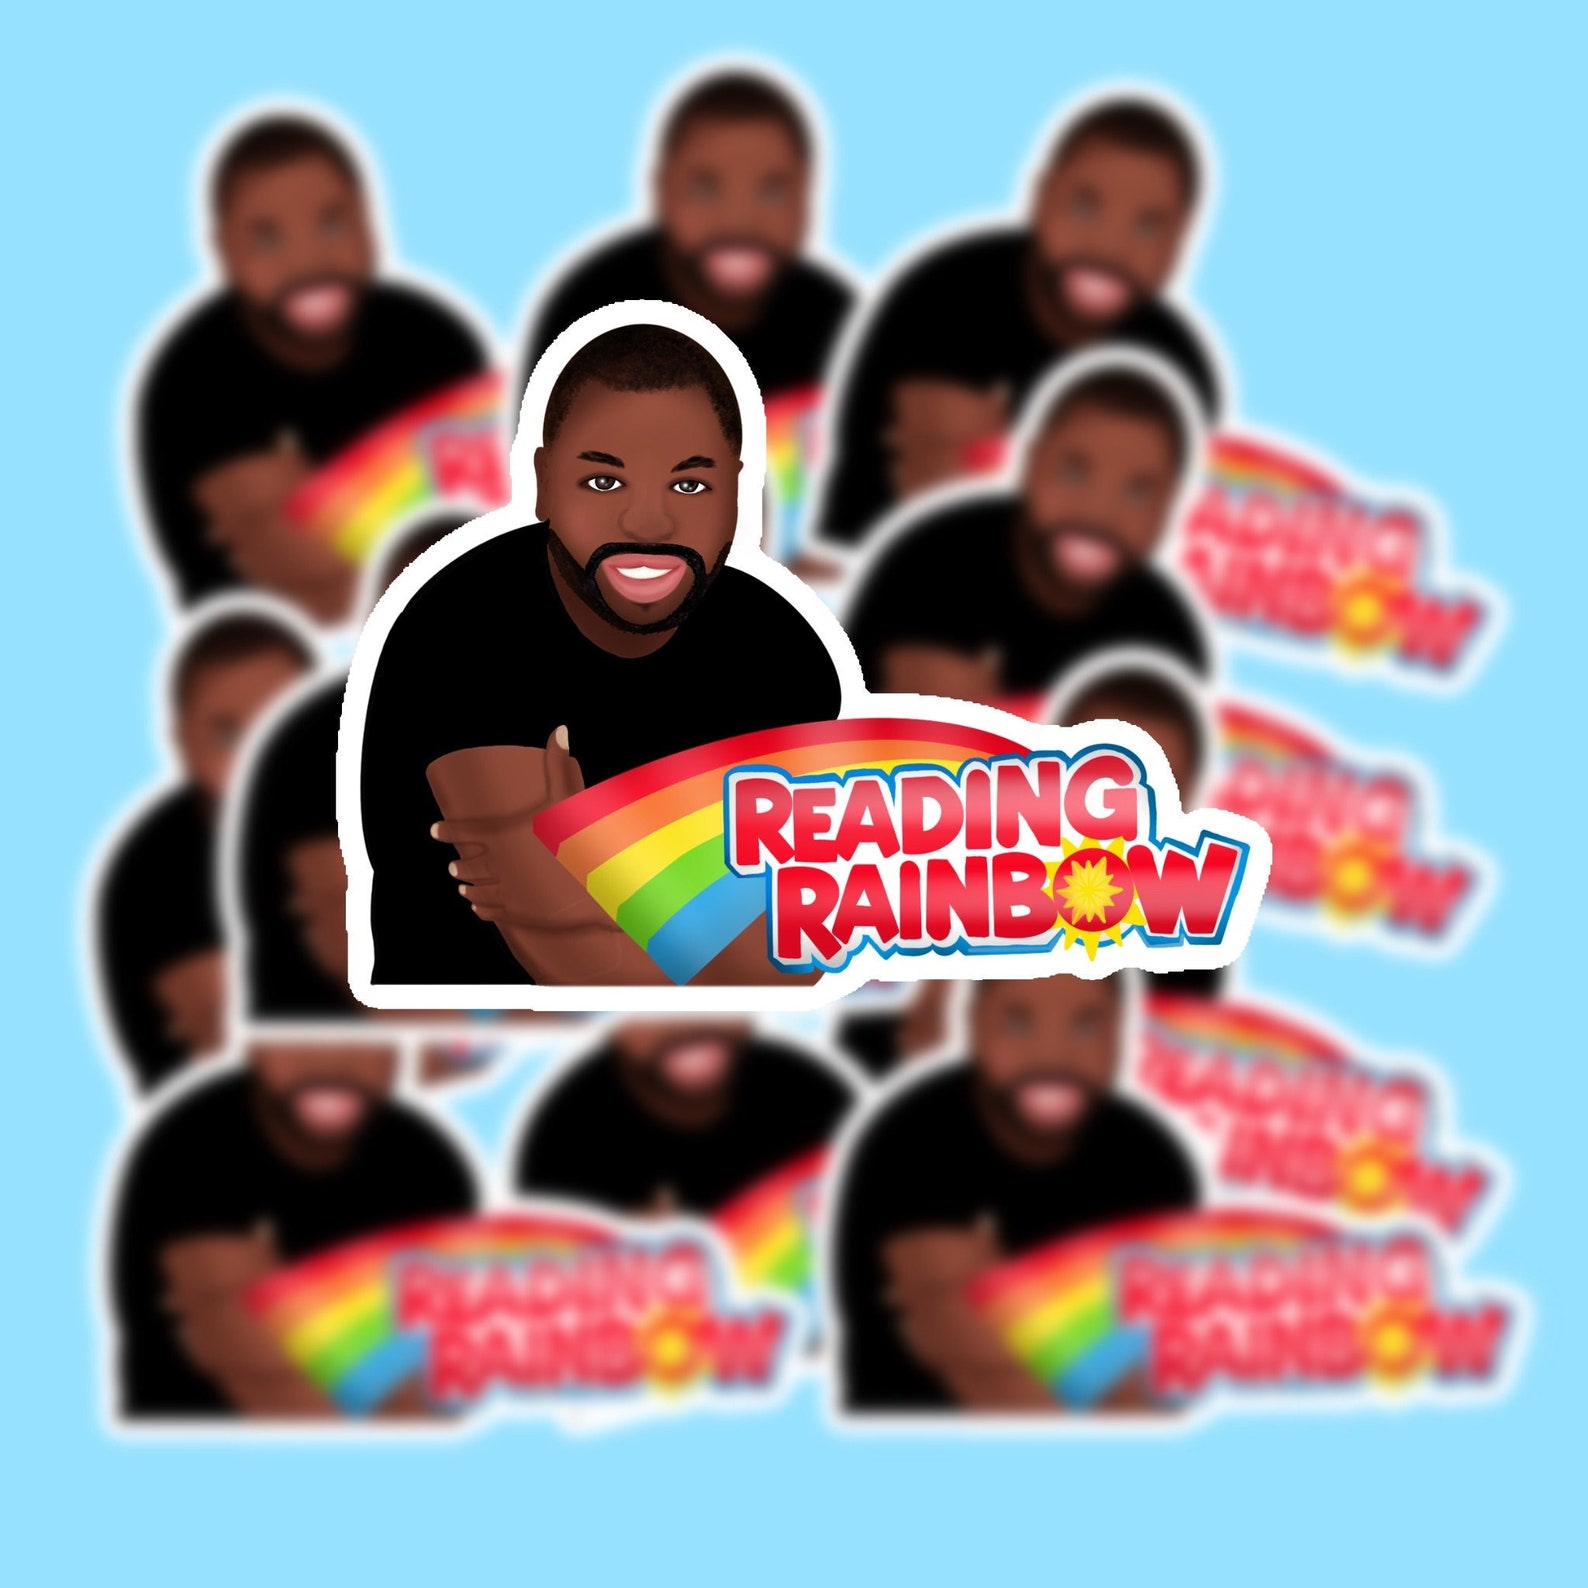 A sticker featuring an illustration of Levar Burton and the Reading Rainbow logo. 